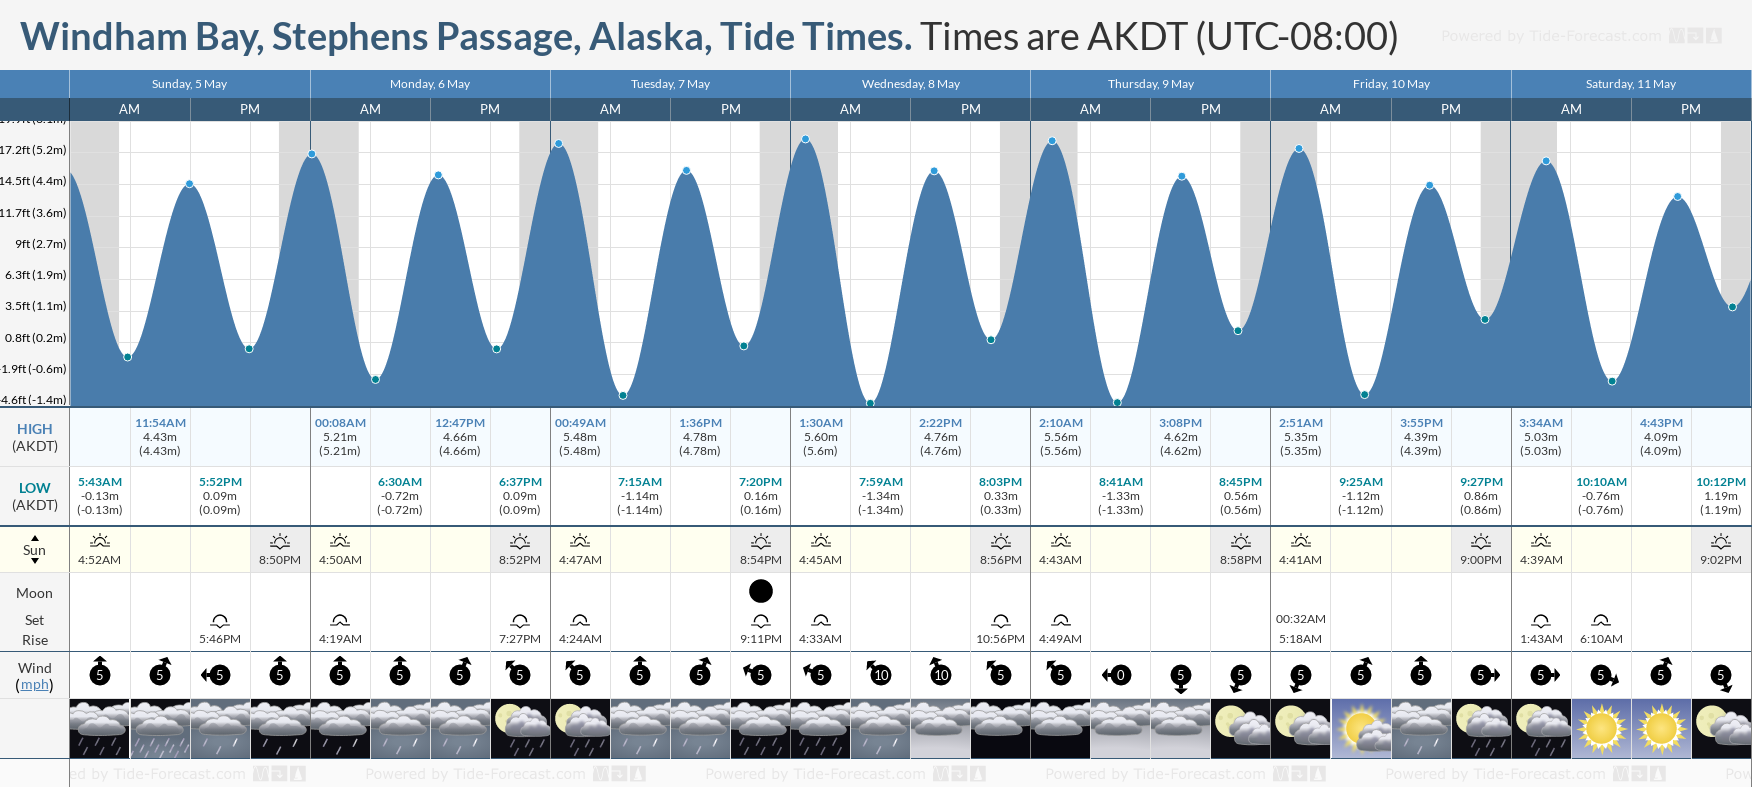 Windham Bay, Stephens Passage, Alaska Tide Chart including high and low tide tide times for the next 7 days